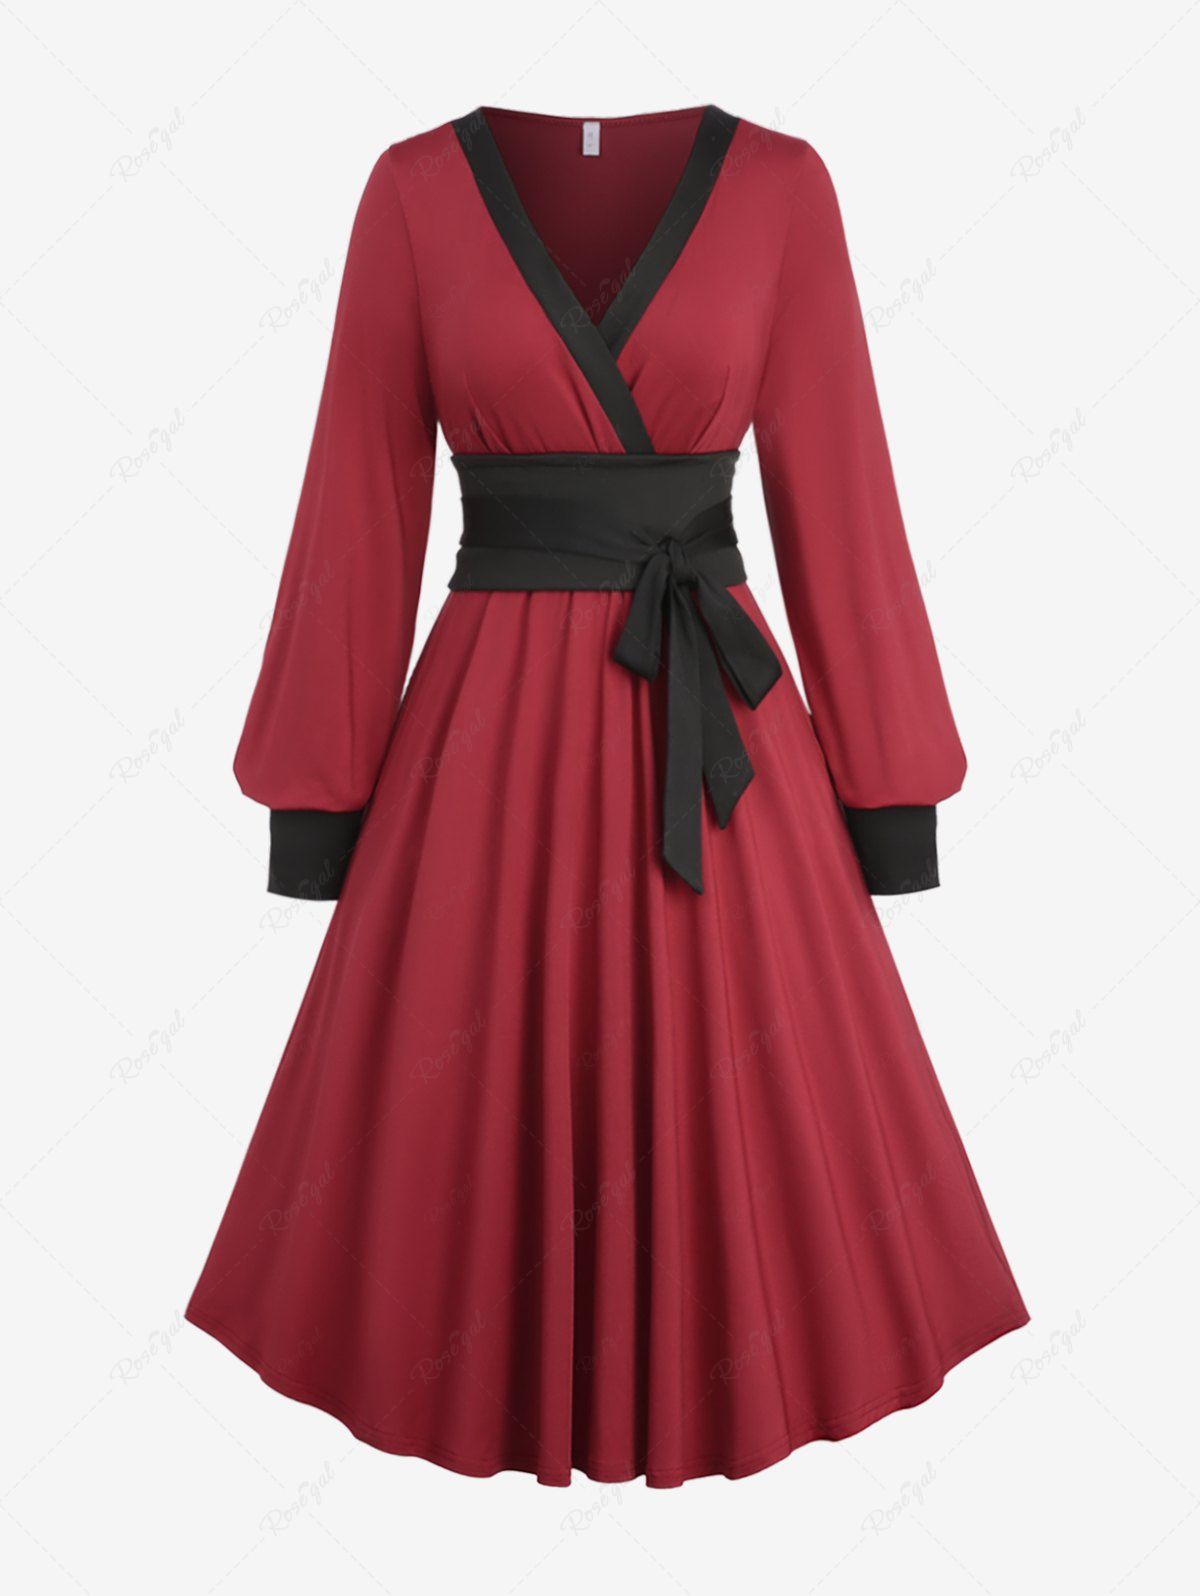 Fashion Plus Size Surplice Ruffles Bishop Sleeve A Line Chinese Style Dress with Bowknot Tie Belt  